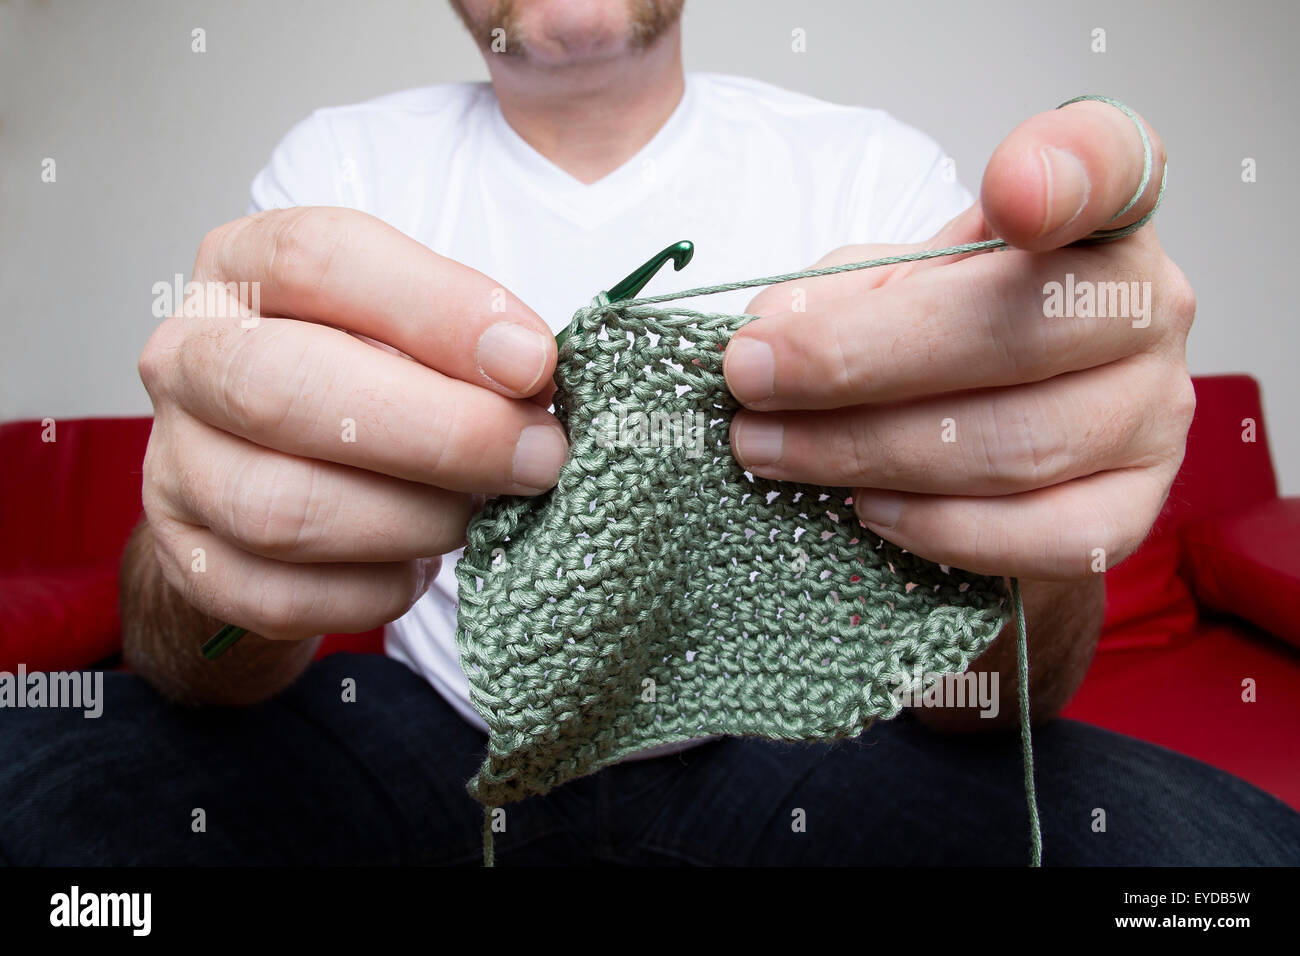 Closeup of a man knitting a scarf on a red sofa Stock Photo